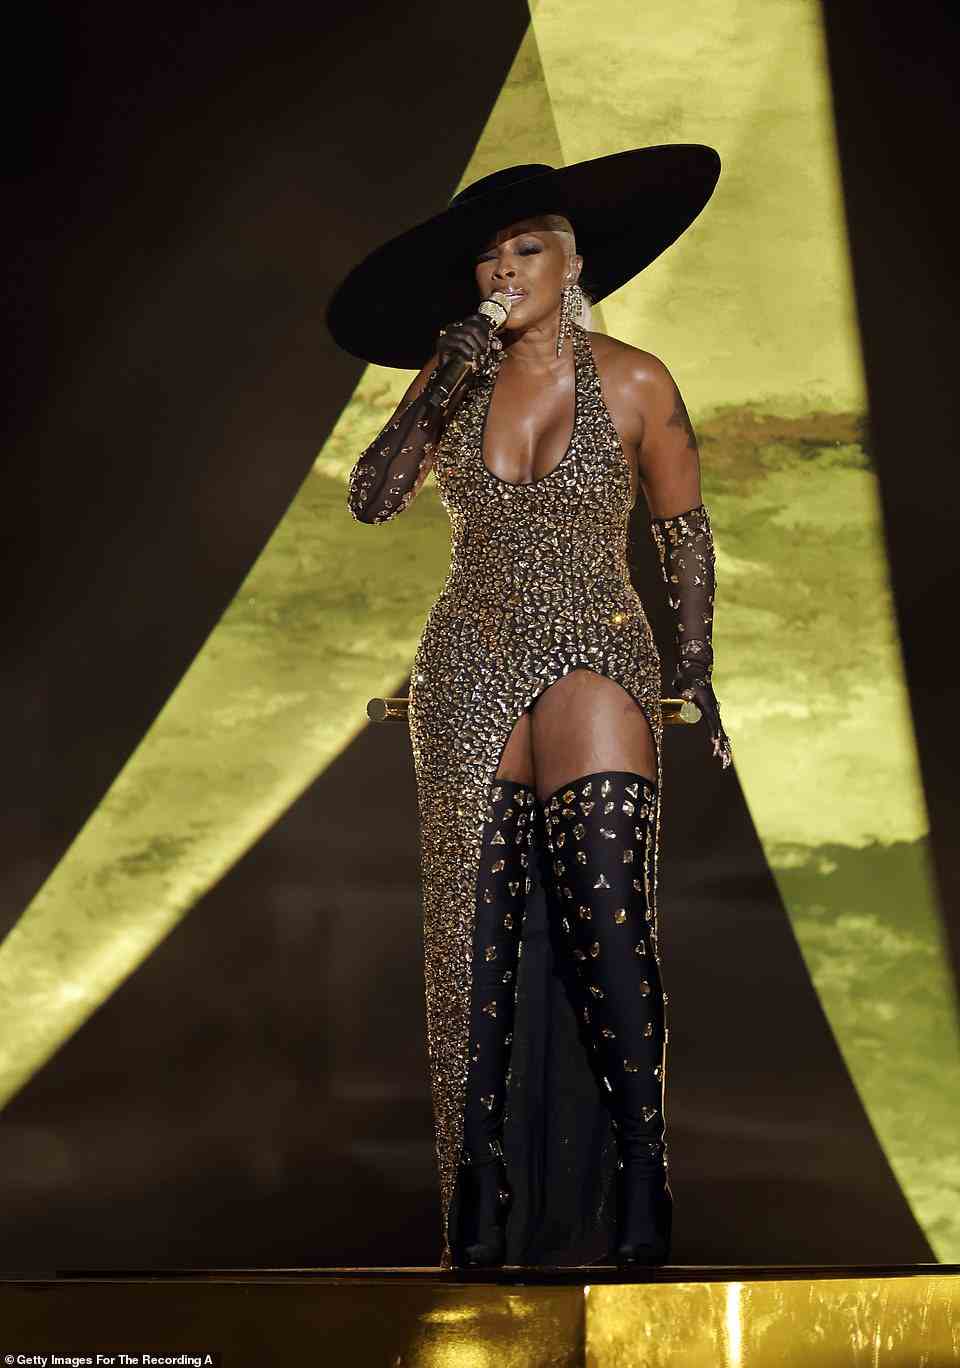 Flawless: Mary J. Blige looked flawless as she took the stage to perform her self-affirmation hit 'Good Morning Gorgeous'